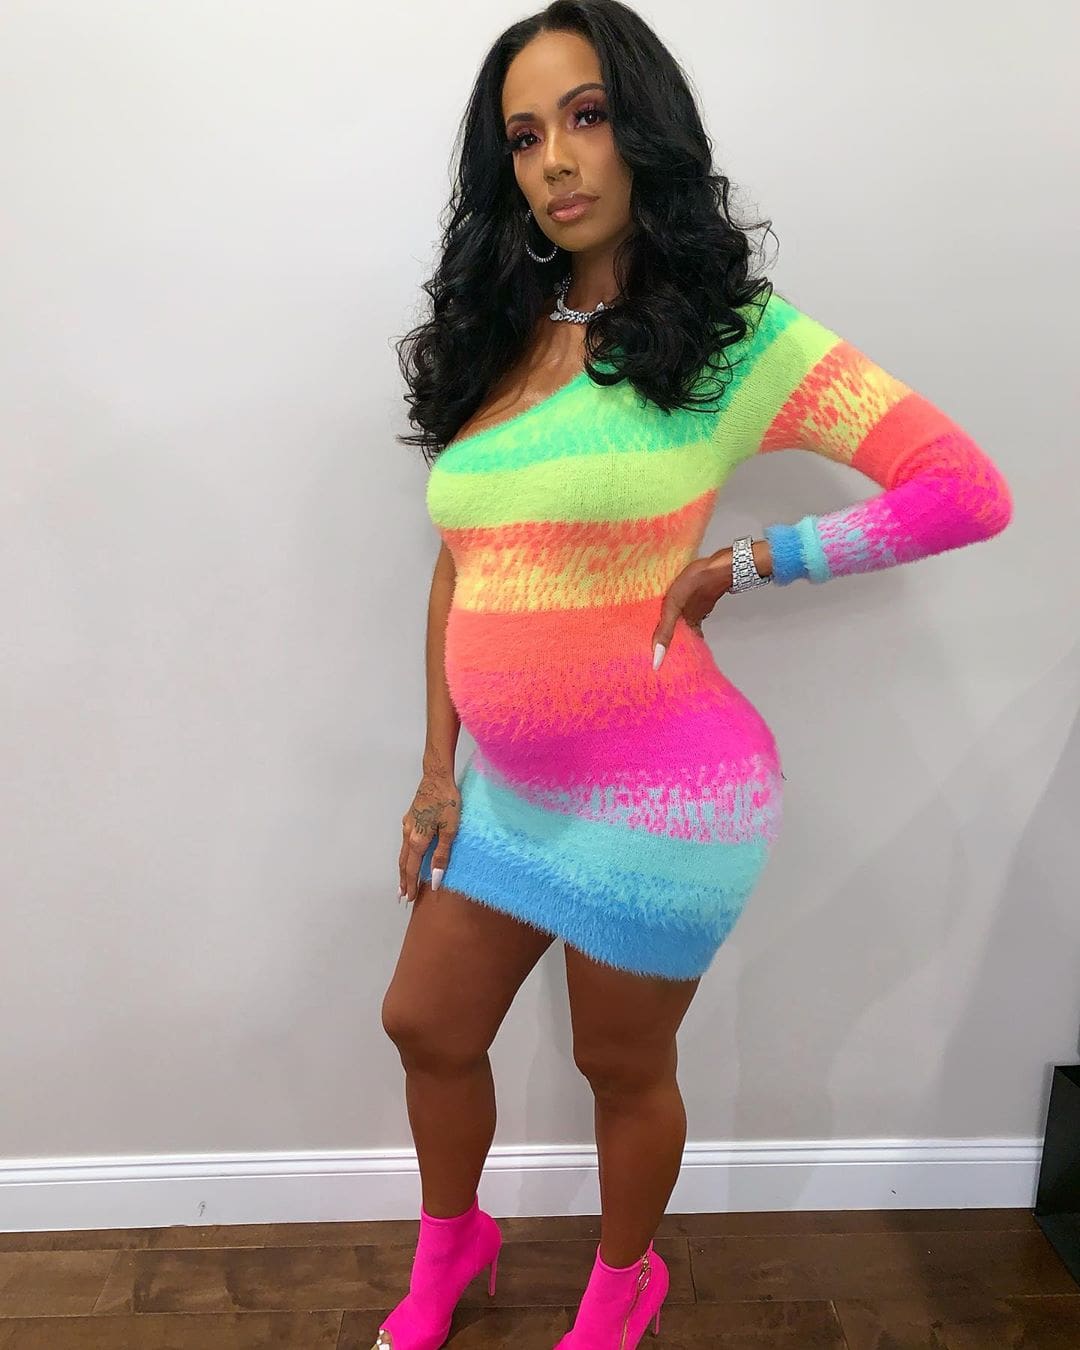 Safaree's Latest Video Featuring Erica Mena Sparks New Pregnancy Rumours For The Birthday Lady - Check Out The Couple Dancing On The Beach!